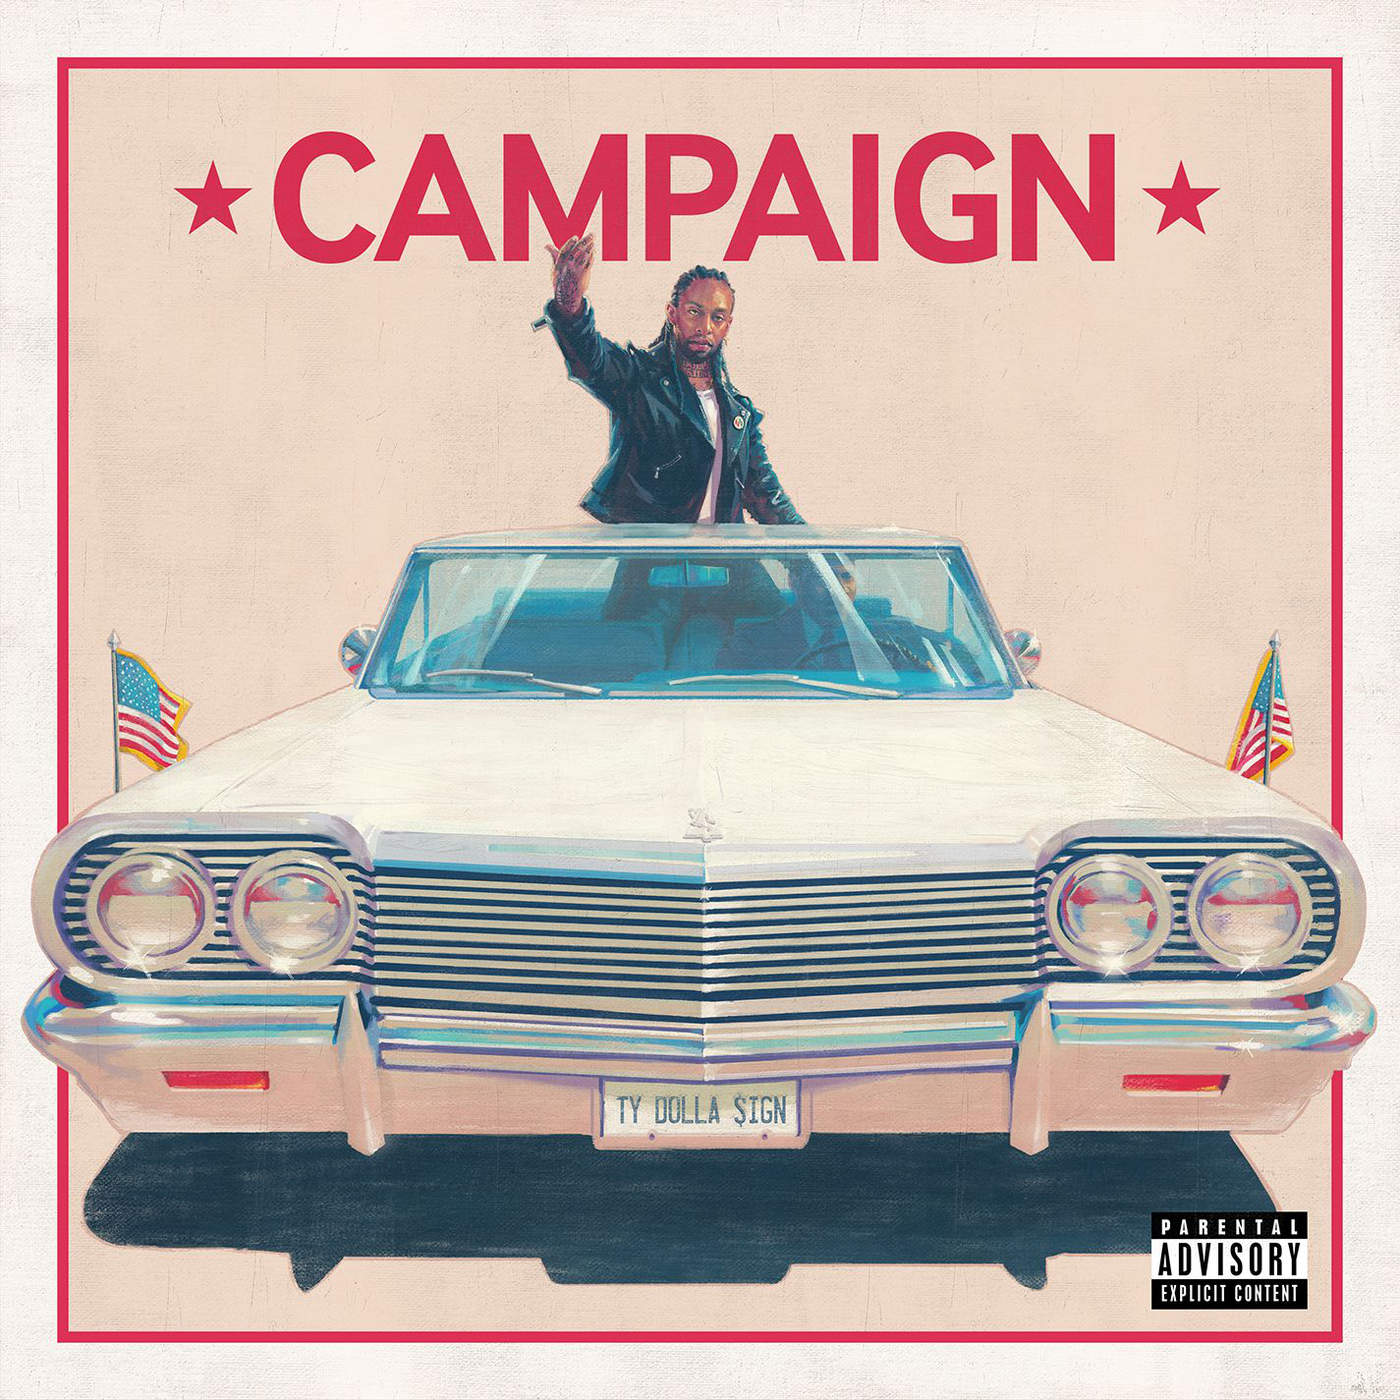 ty-dolla-sign-campaign